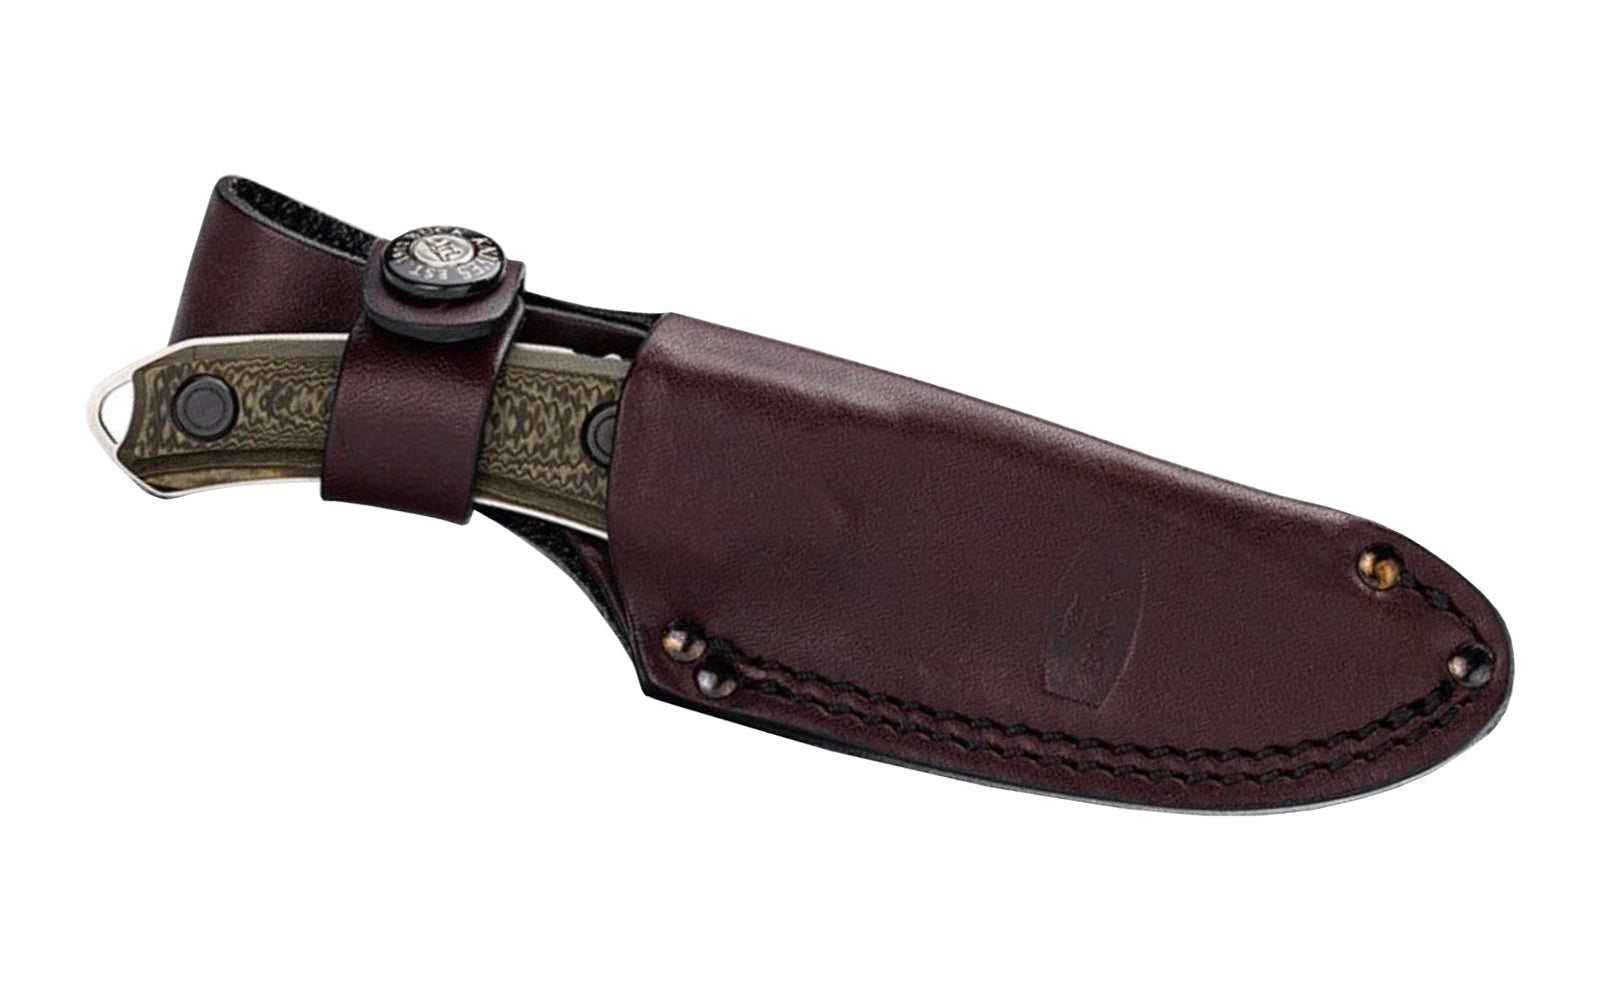 The Buck Knives 662 Alpha Scout Pro Knife has a blade made of S35VN Stainless Steel & a textured richlite handle. The perfect knife for detailed work on large-game or to process whitetail or small game. Full tang Buck knife. Includes leather sheath. Made in USA. Model 0662BRS-B